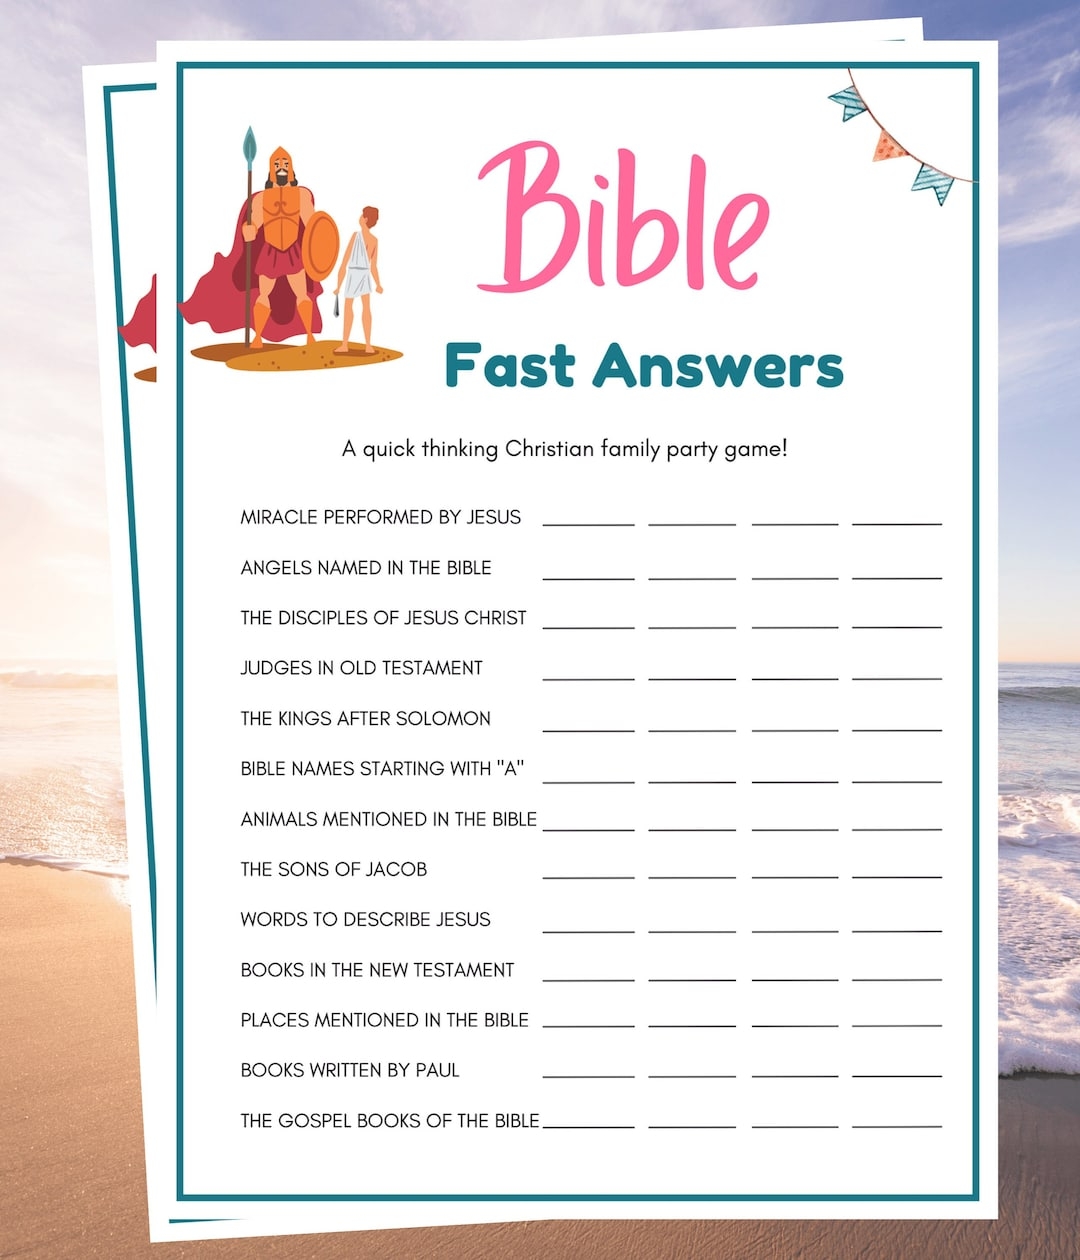 Bible Fast Answers Printable Bible Games For Kids And Adults Sunday School Games Bible Study Games Womens Ministry Games Church Games Etsy Israel